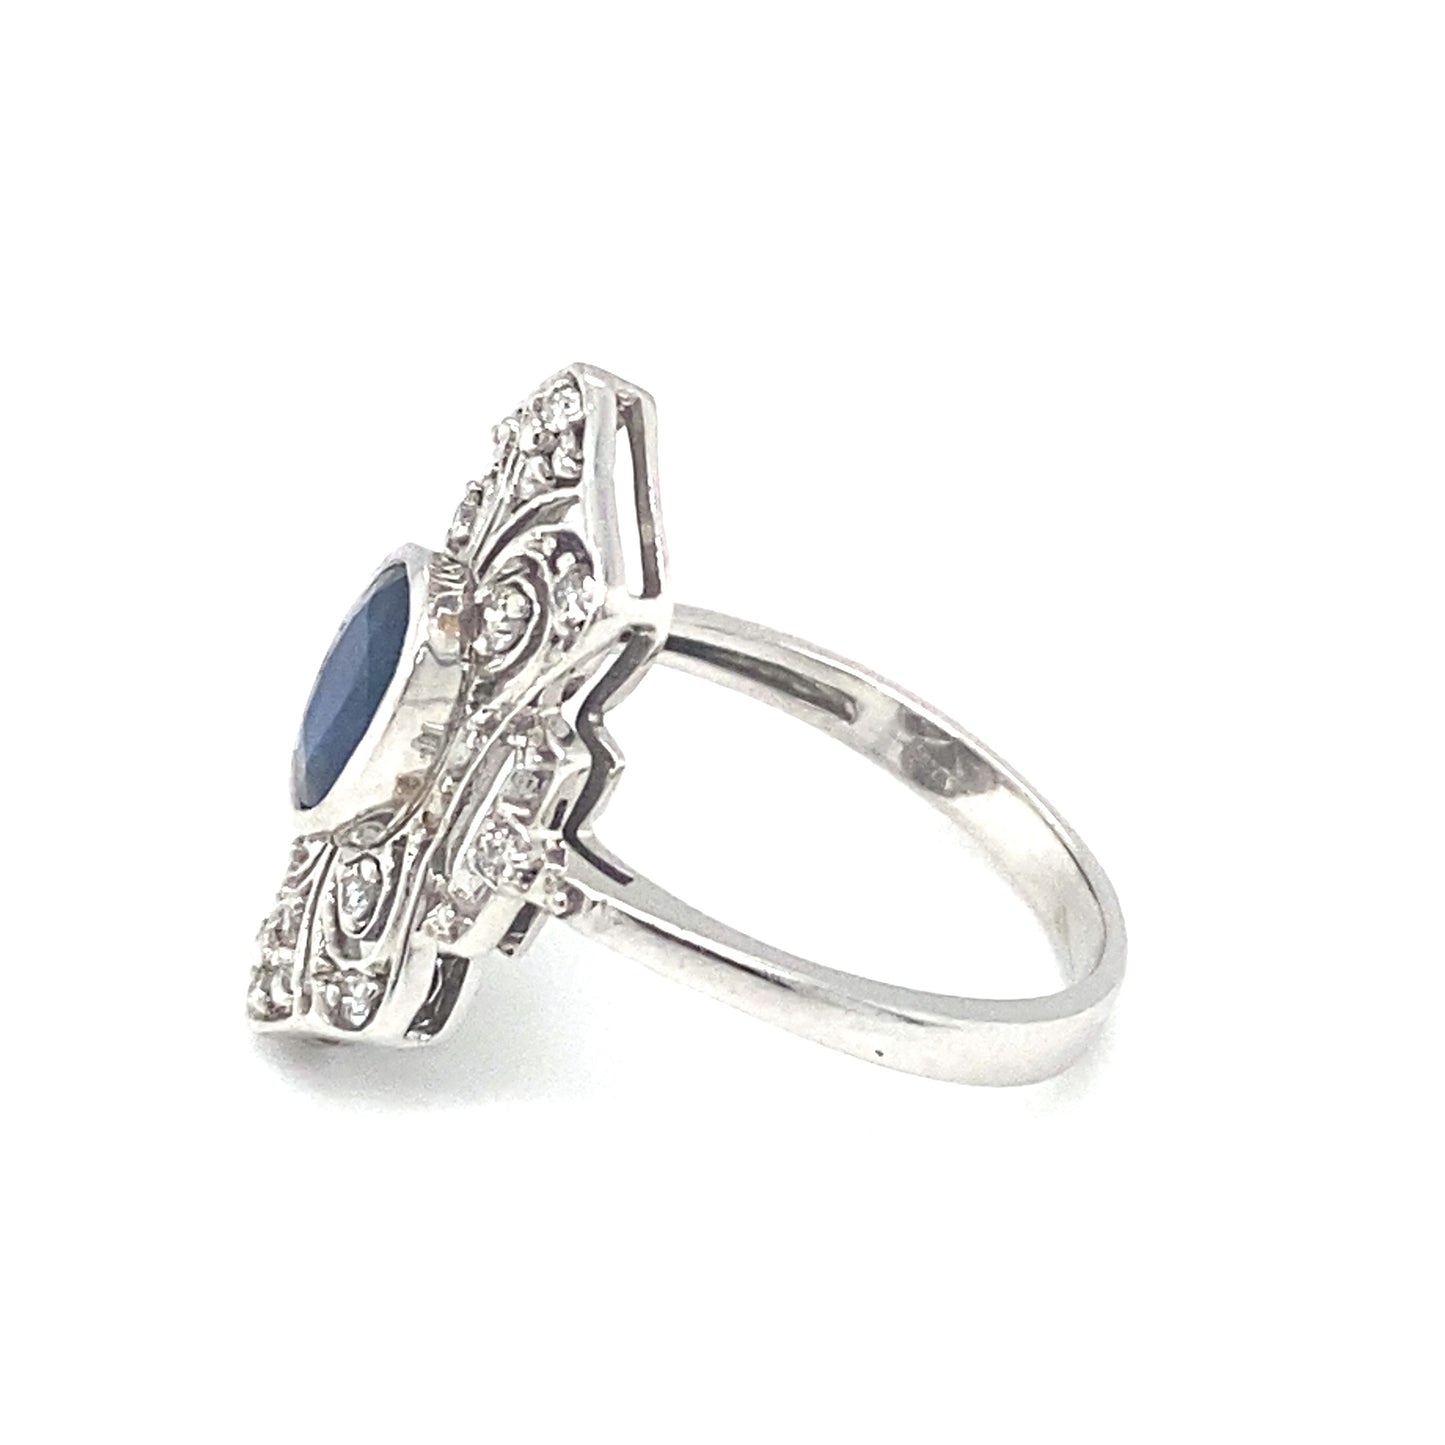 Circa 1950s Art Deco Style Sapphire and Diamond Cocktail Ring in 14K White Gold